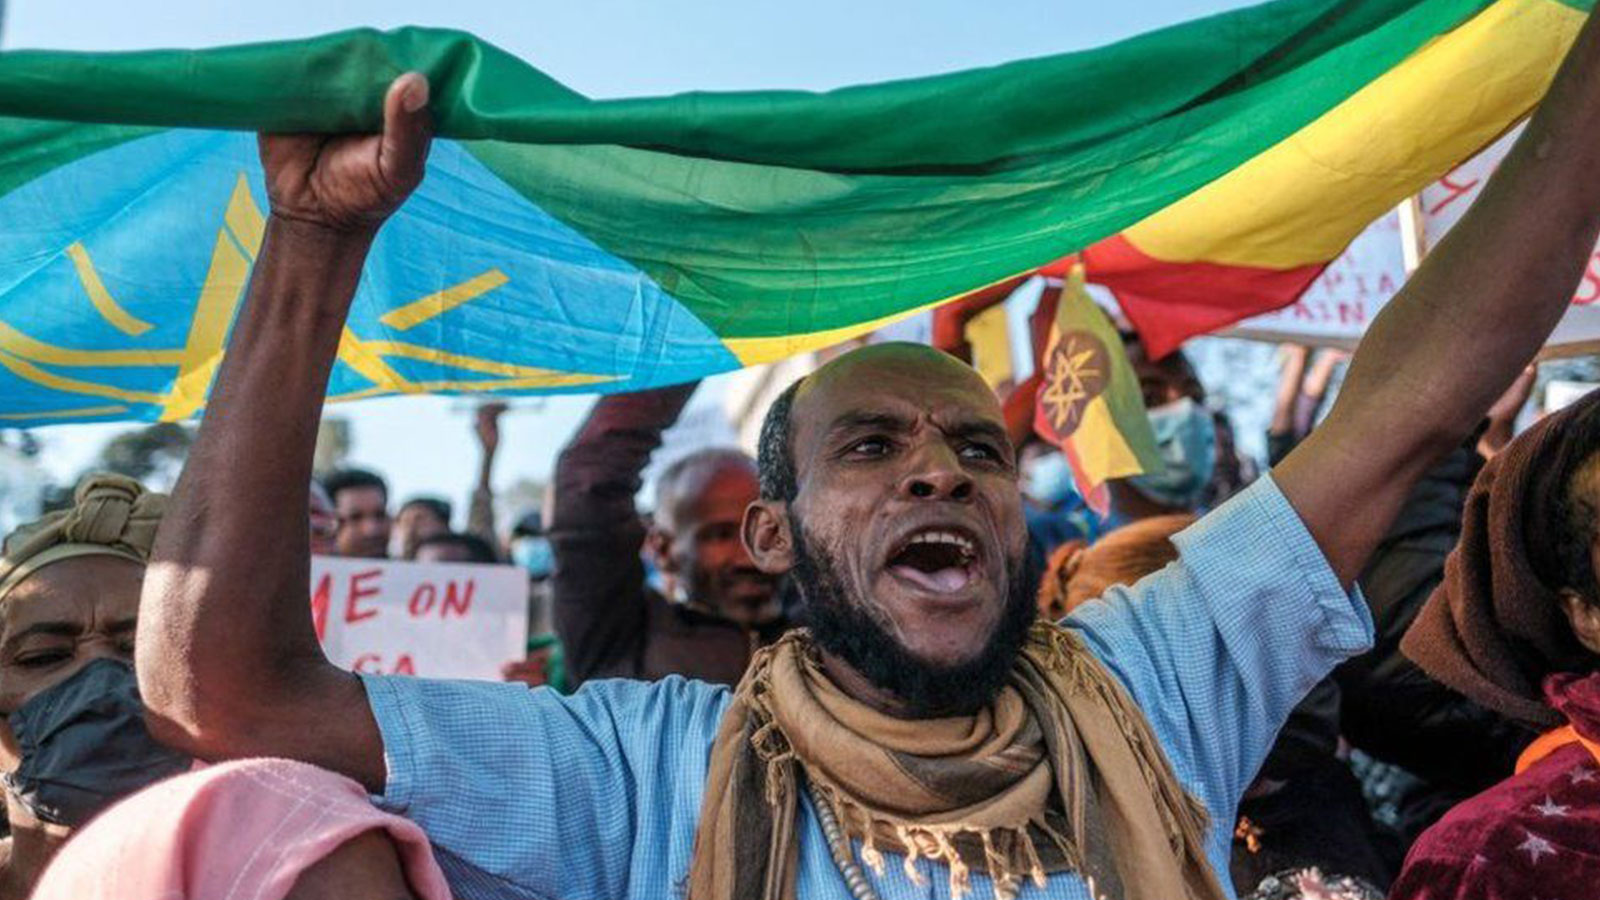 Earlier this month, tens of thousands turned out in Addis Ababa to back the government in the war against the TPLF 